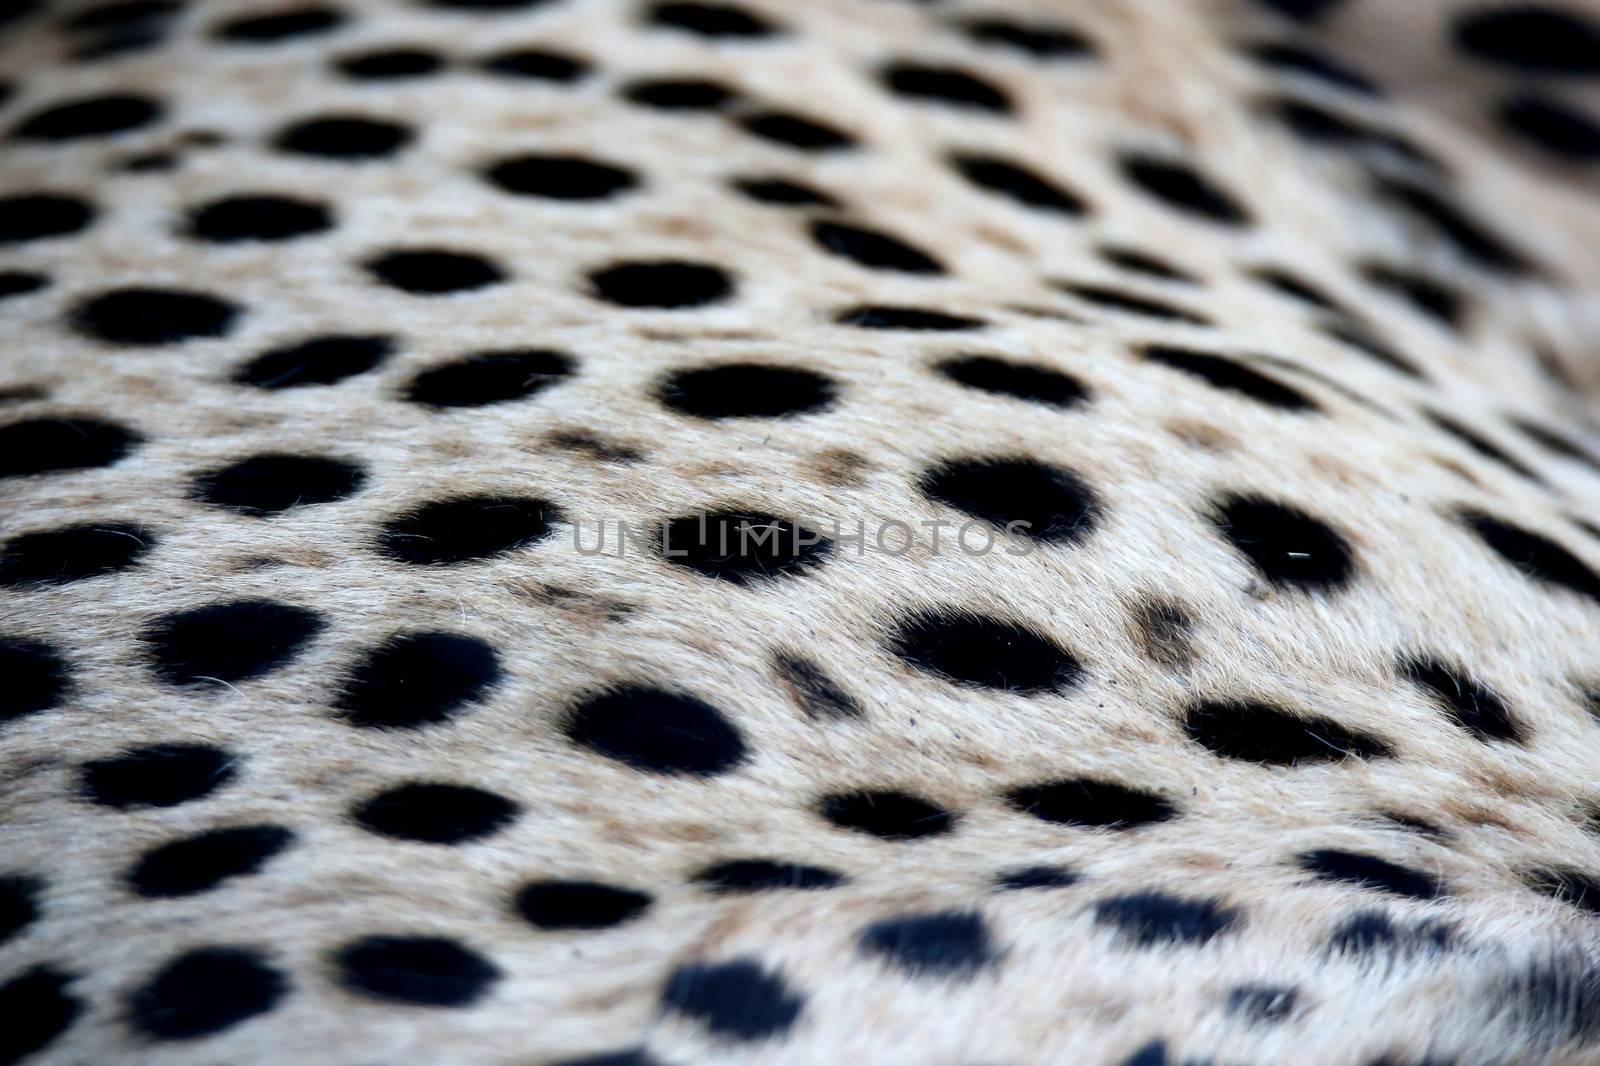 Black spotted fur of the Cheetah wild cat